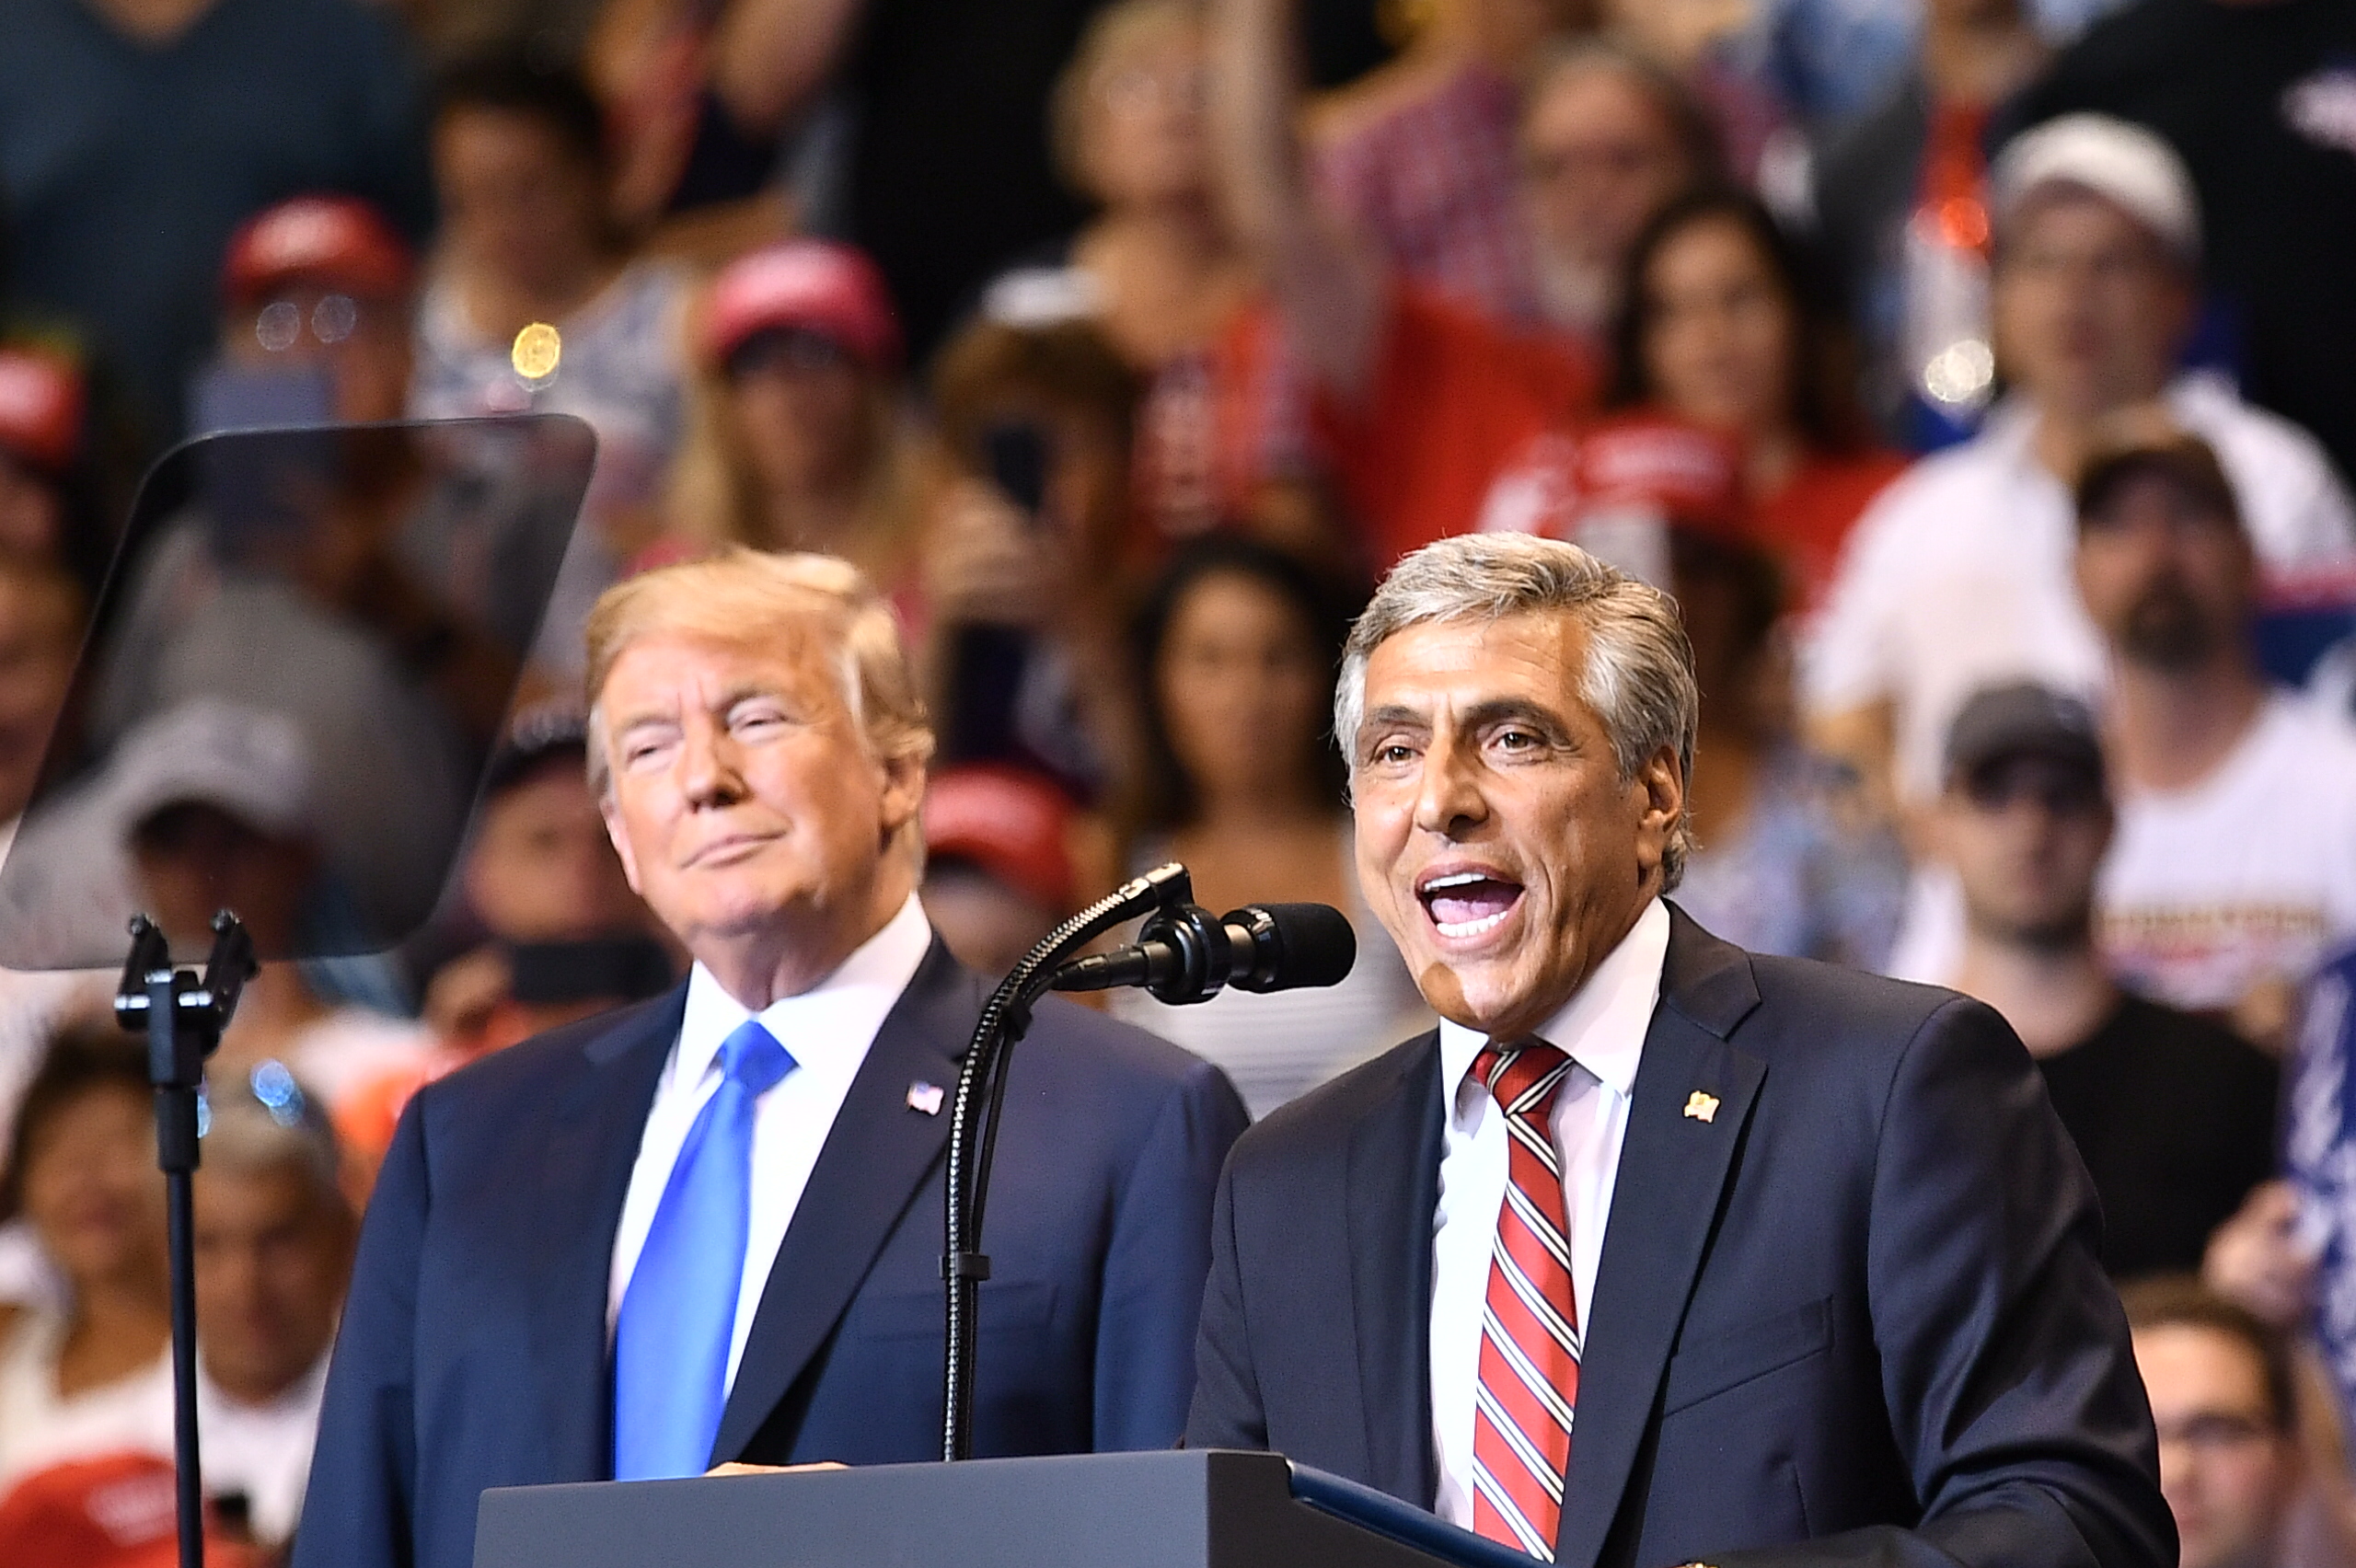 Republican Senate candidate Lou Barletta speaks in front of US President Donald Trump at a political rally in Pennsylvania